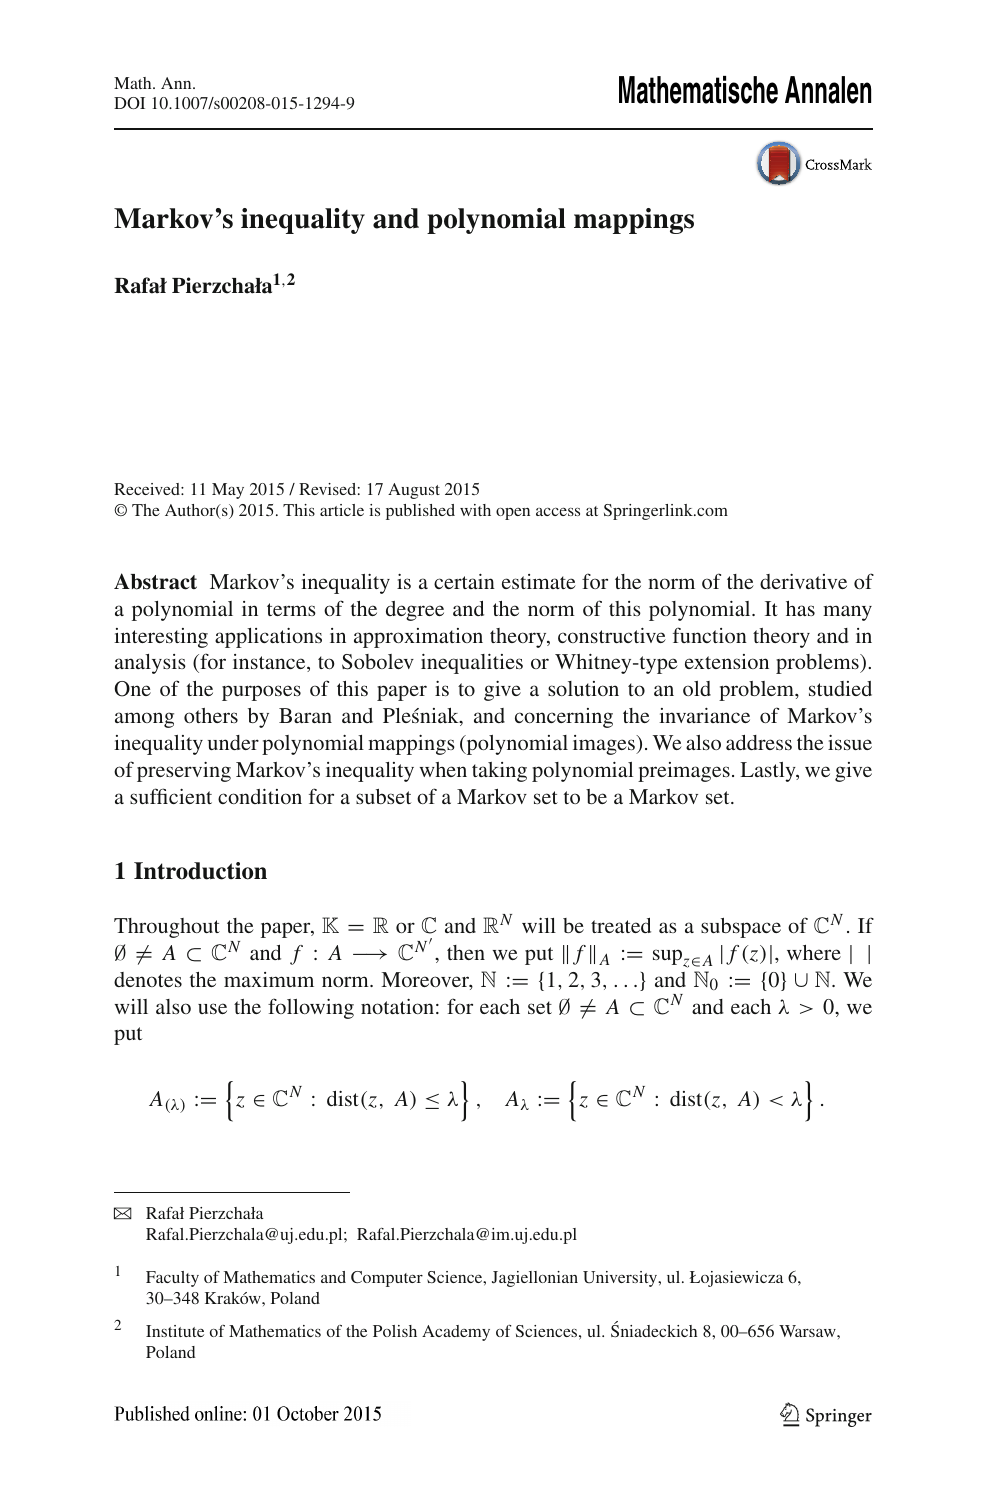 Markov S Inequality And Polynomial Mappings Topic Of Research Paper In Mathematics Download Scholarly Article Pdf And Read For Free On Cyberleninka Open Science Hub